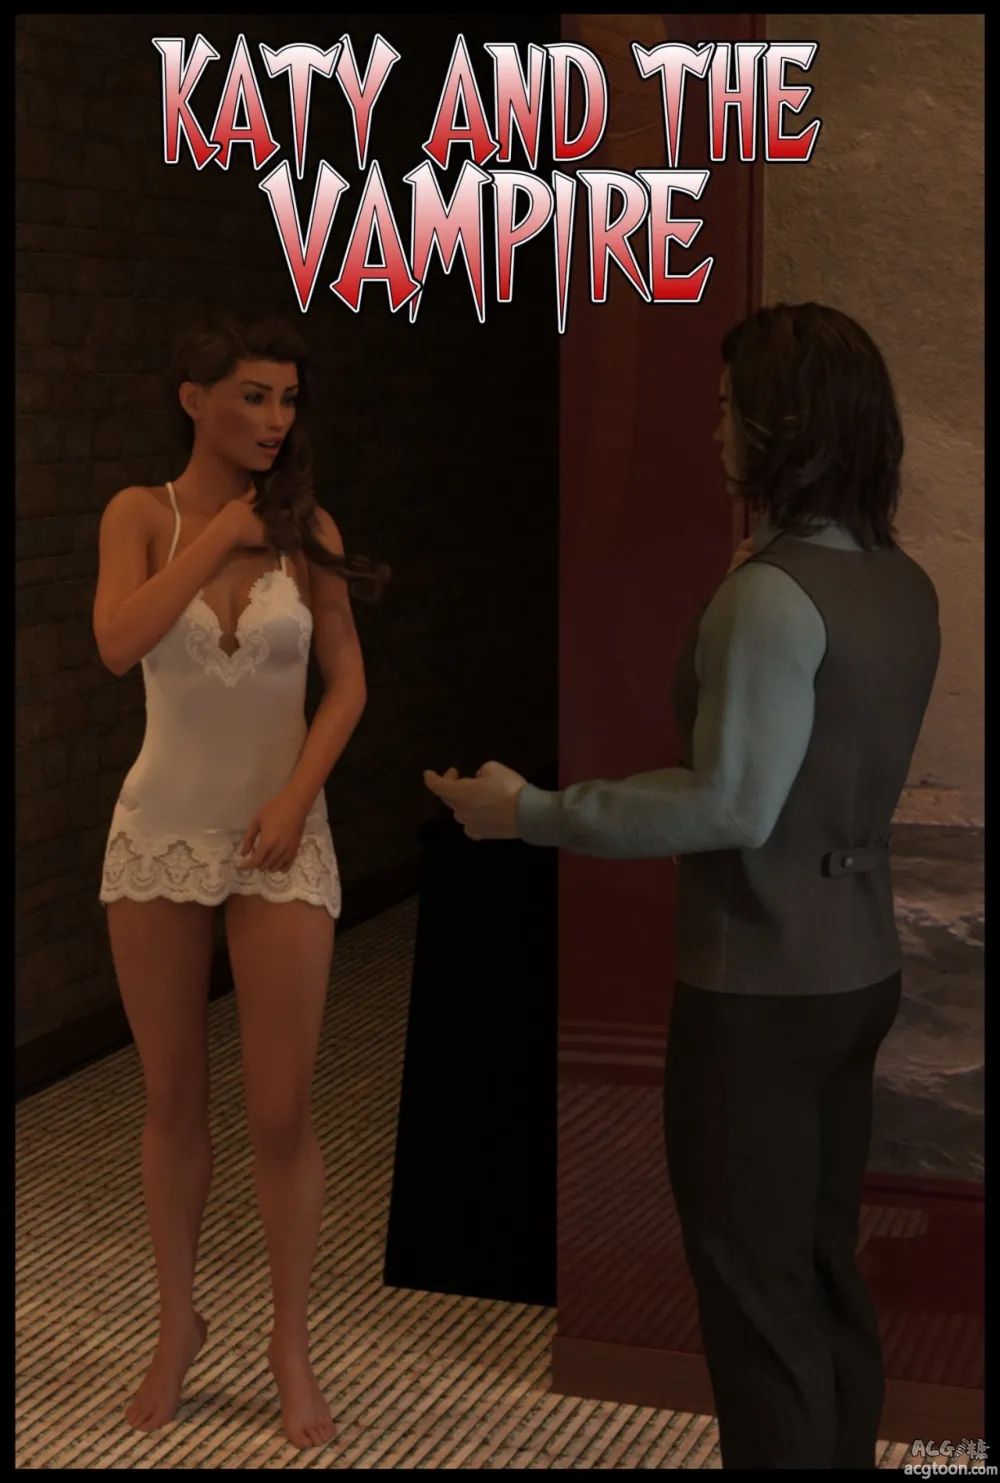 Katy and the vampire - Page 1